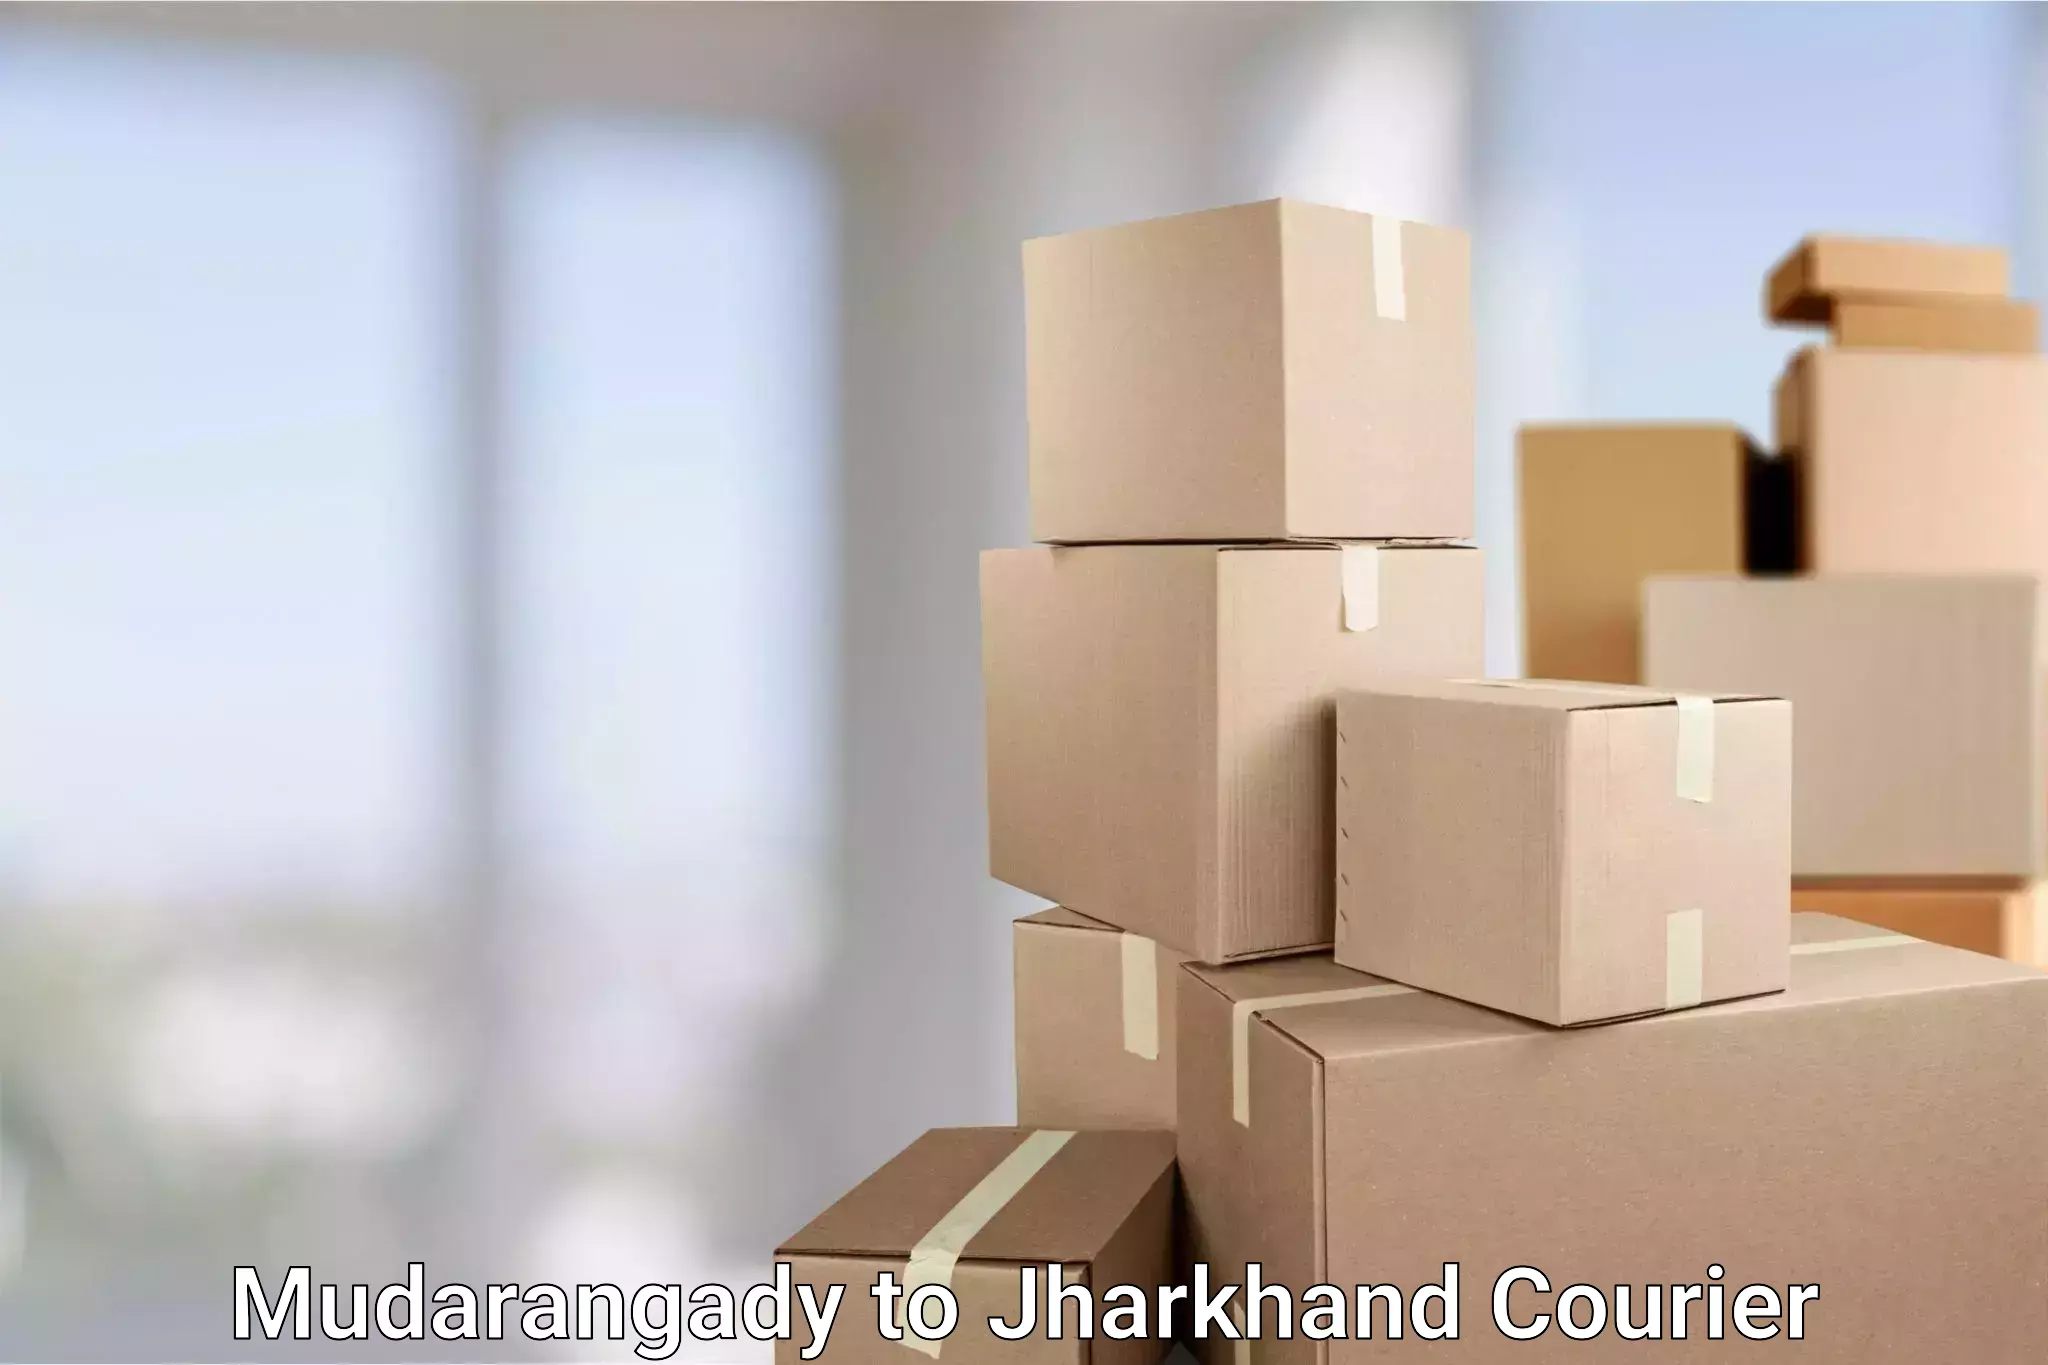 Cash on delivery service Mudarangady to Jharkhand